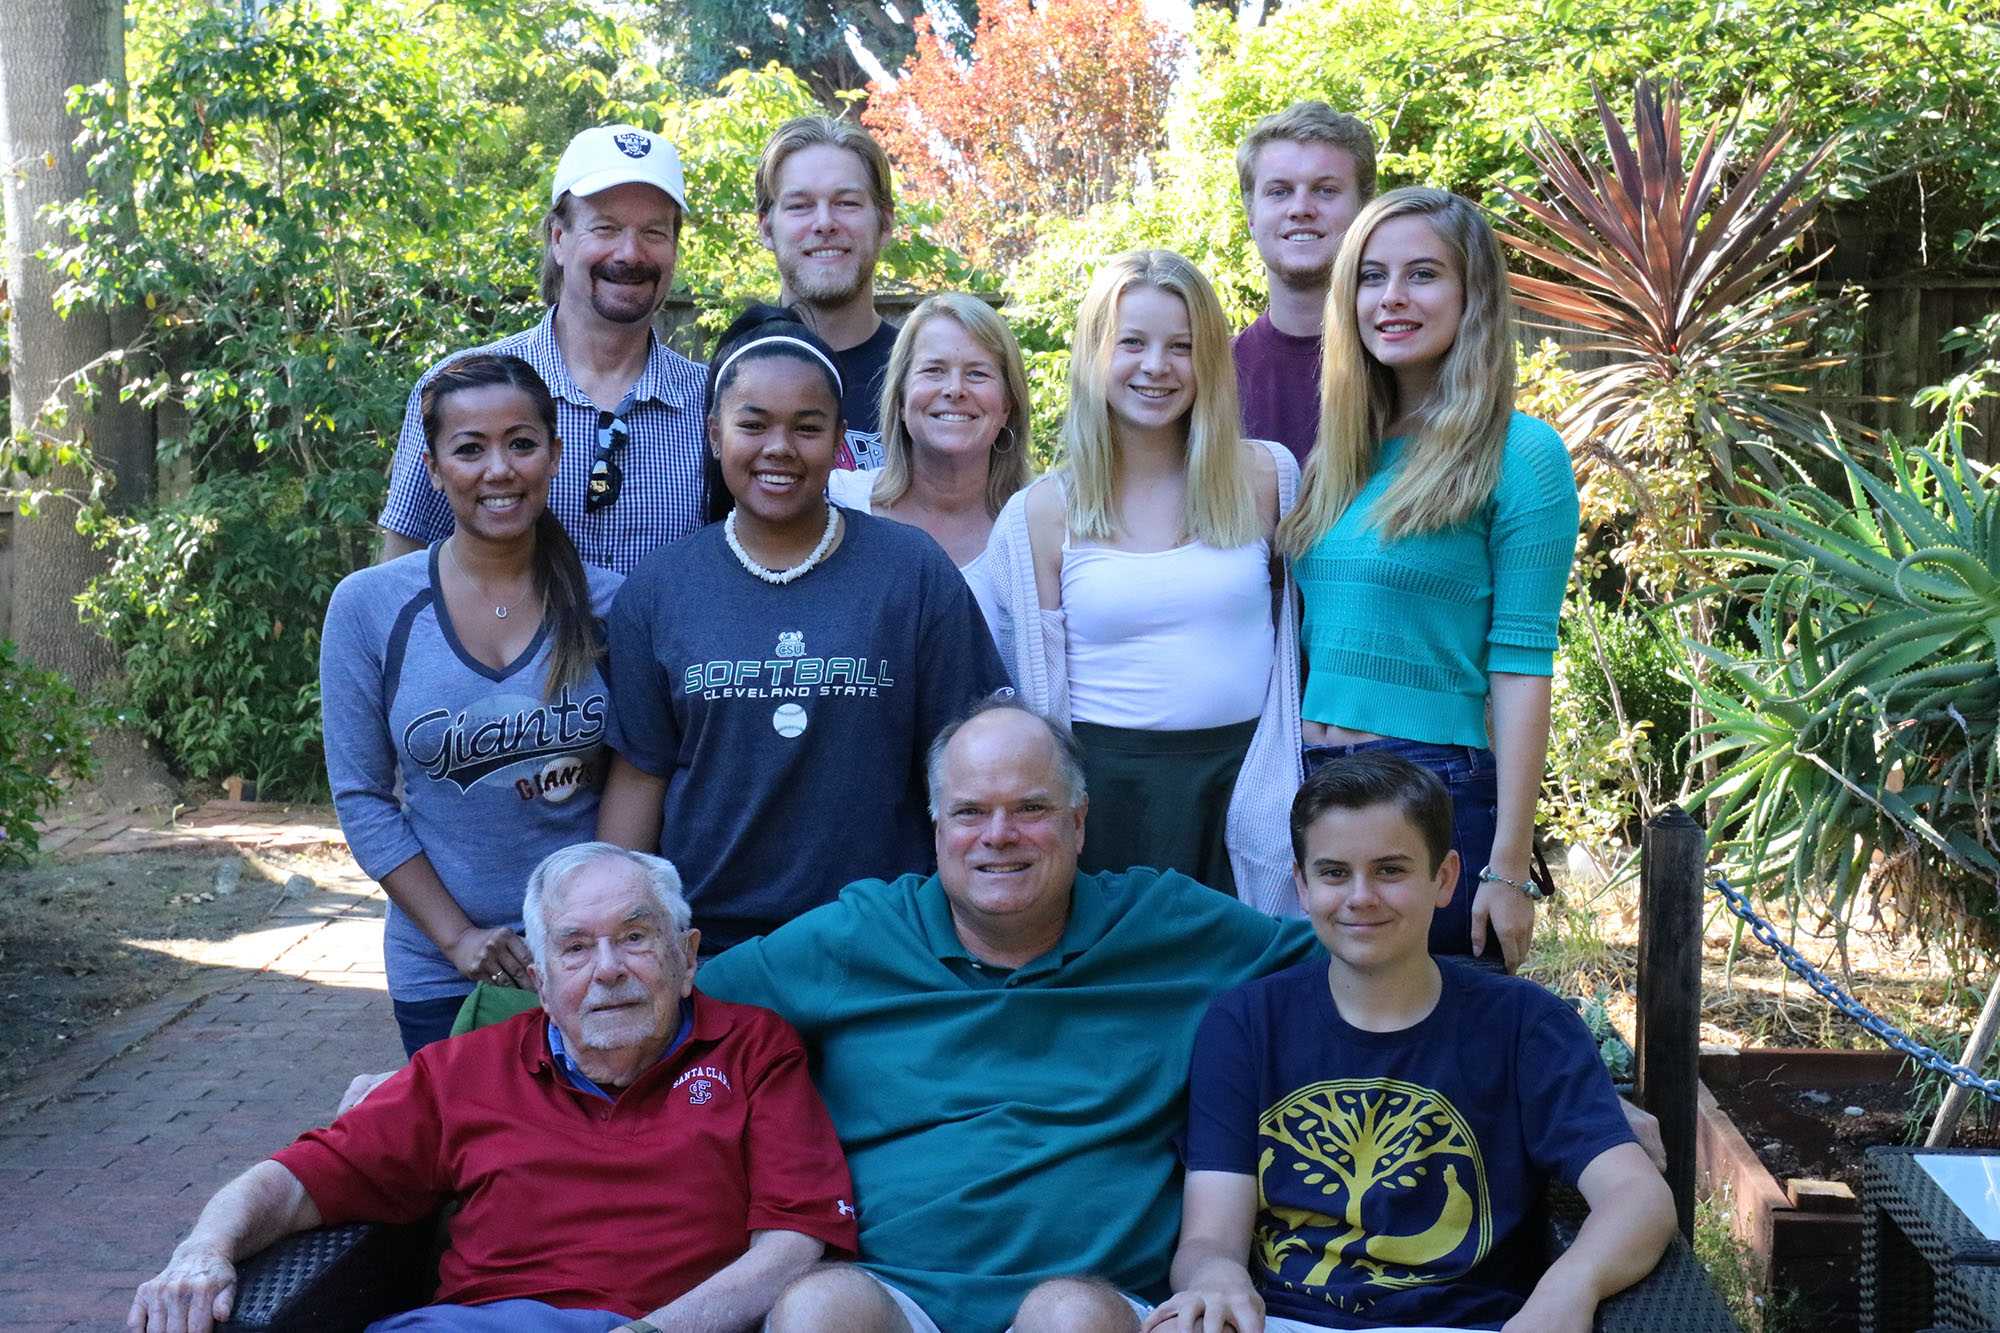 The+Swezey+family+comes+together+for+a+family+barbeque+on+labor+day.+Top+row+from+left%3A+Matthew+Fogarty%2C+Drake+Swezey%2C+Kirk+Swezey.+Middle+row+from+left%3A+Sophie+Swezey%2C+Michaela+Fogarty%2C+Megan+Fogarty%2C+Dhesya+Swezey%2C+Weinda+Swezey.+Bottom+row+from+left%3A+Kyle+Swezey%2C+Rory+Swezey%2C+Lawrence+Swezey.+Photo+by+Sophie+Nakai.